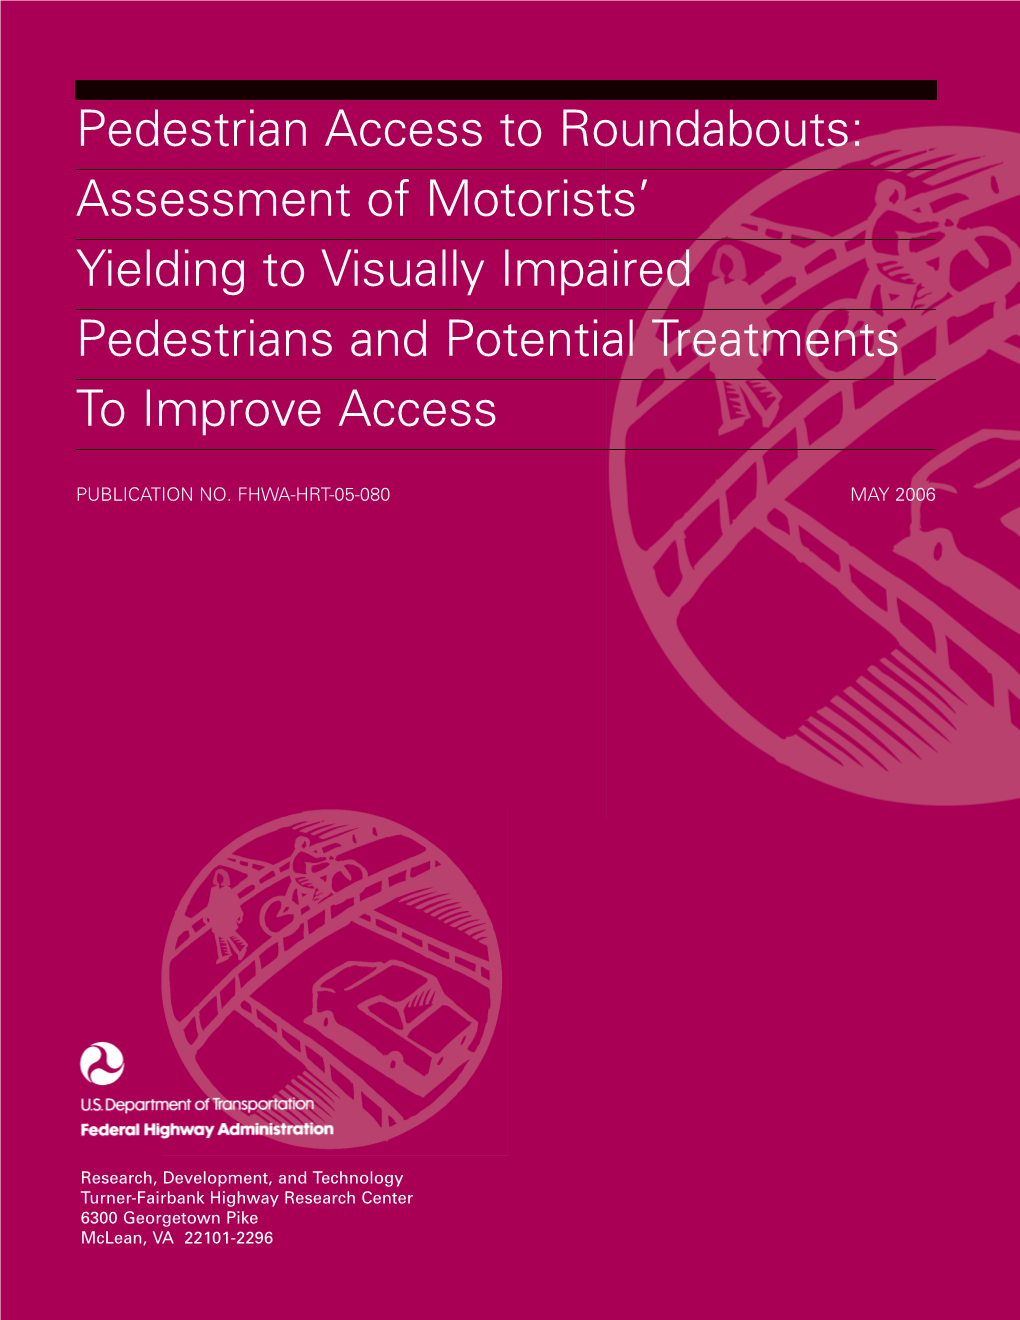 Assessment of Motorists' Yielding to Visually Impaired Pedestrians And